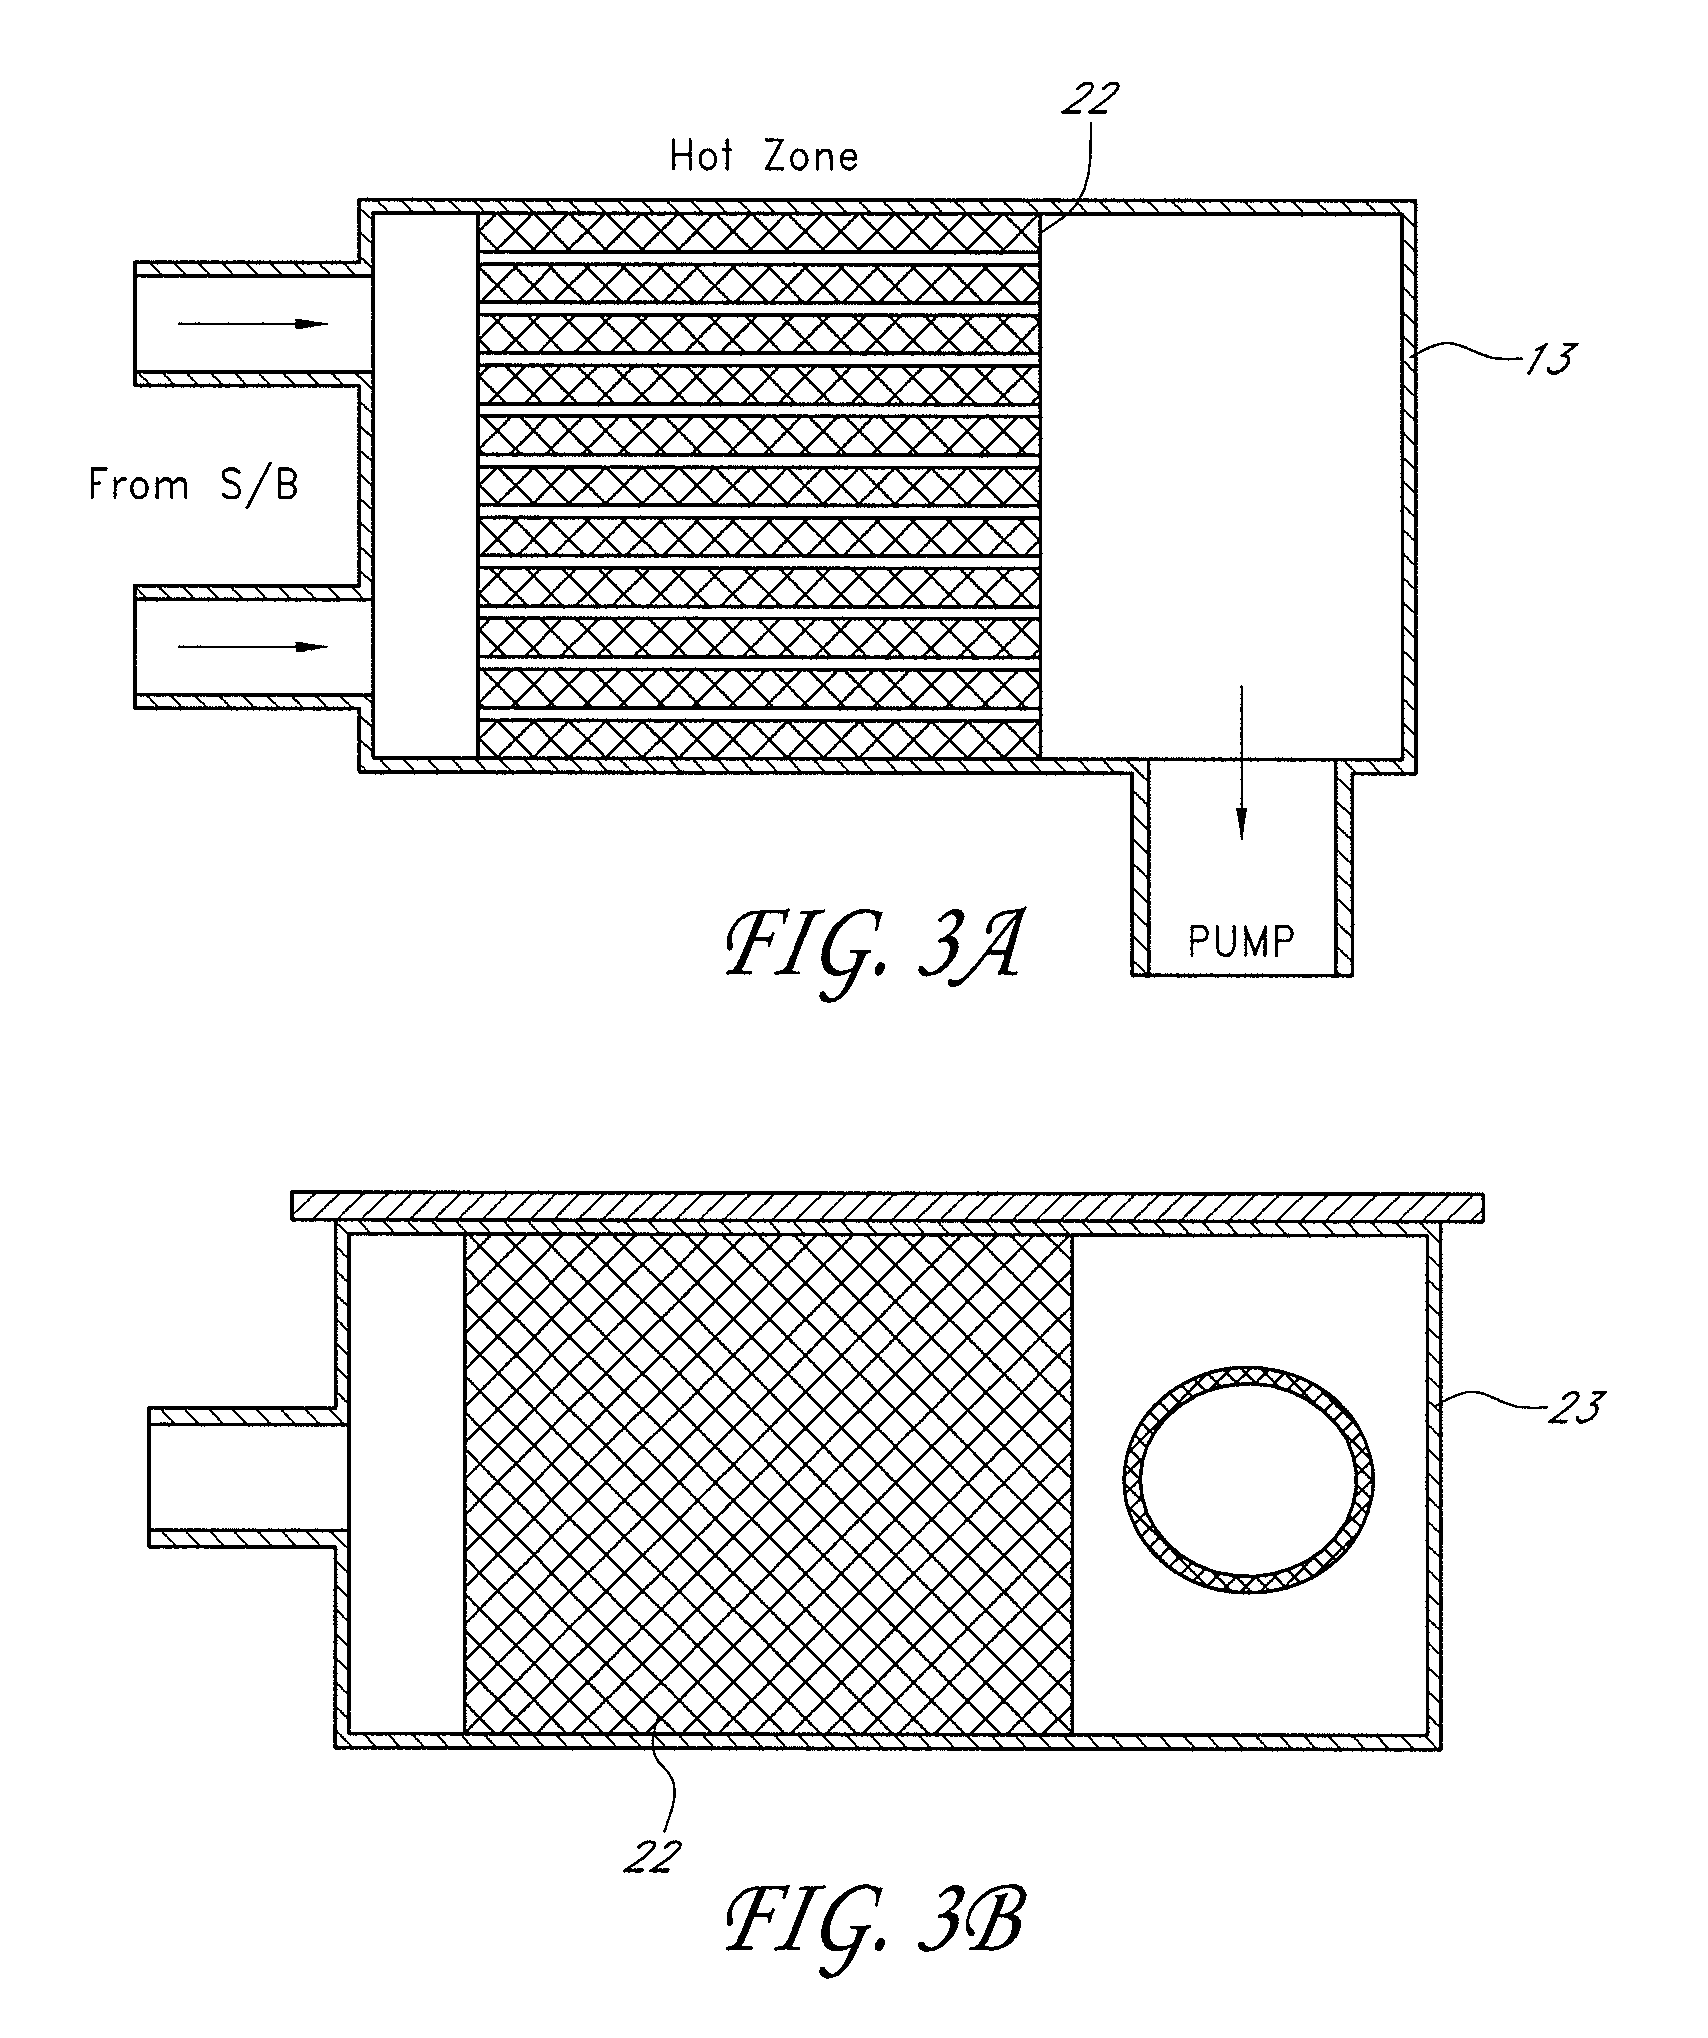 Method and apparatus for removing substances from gases